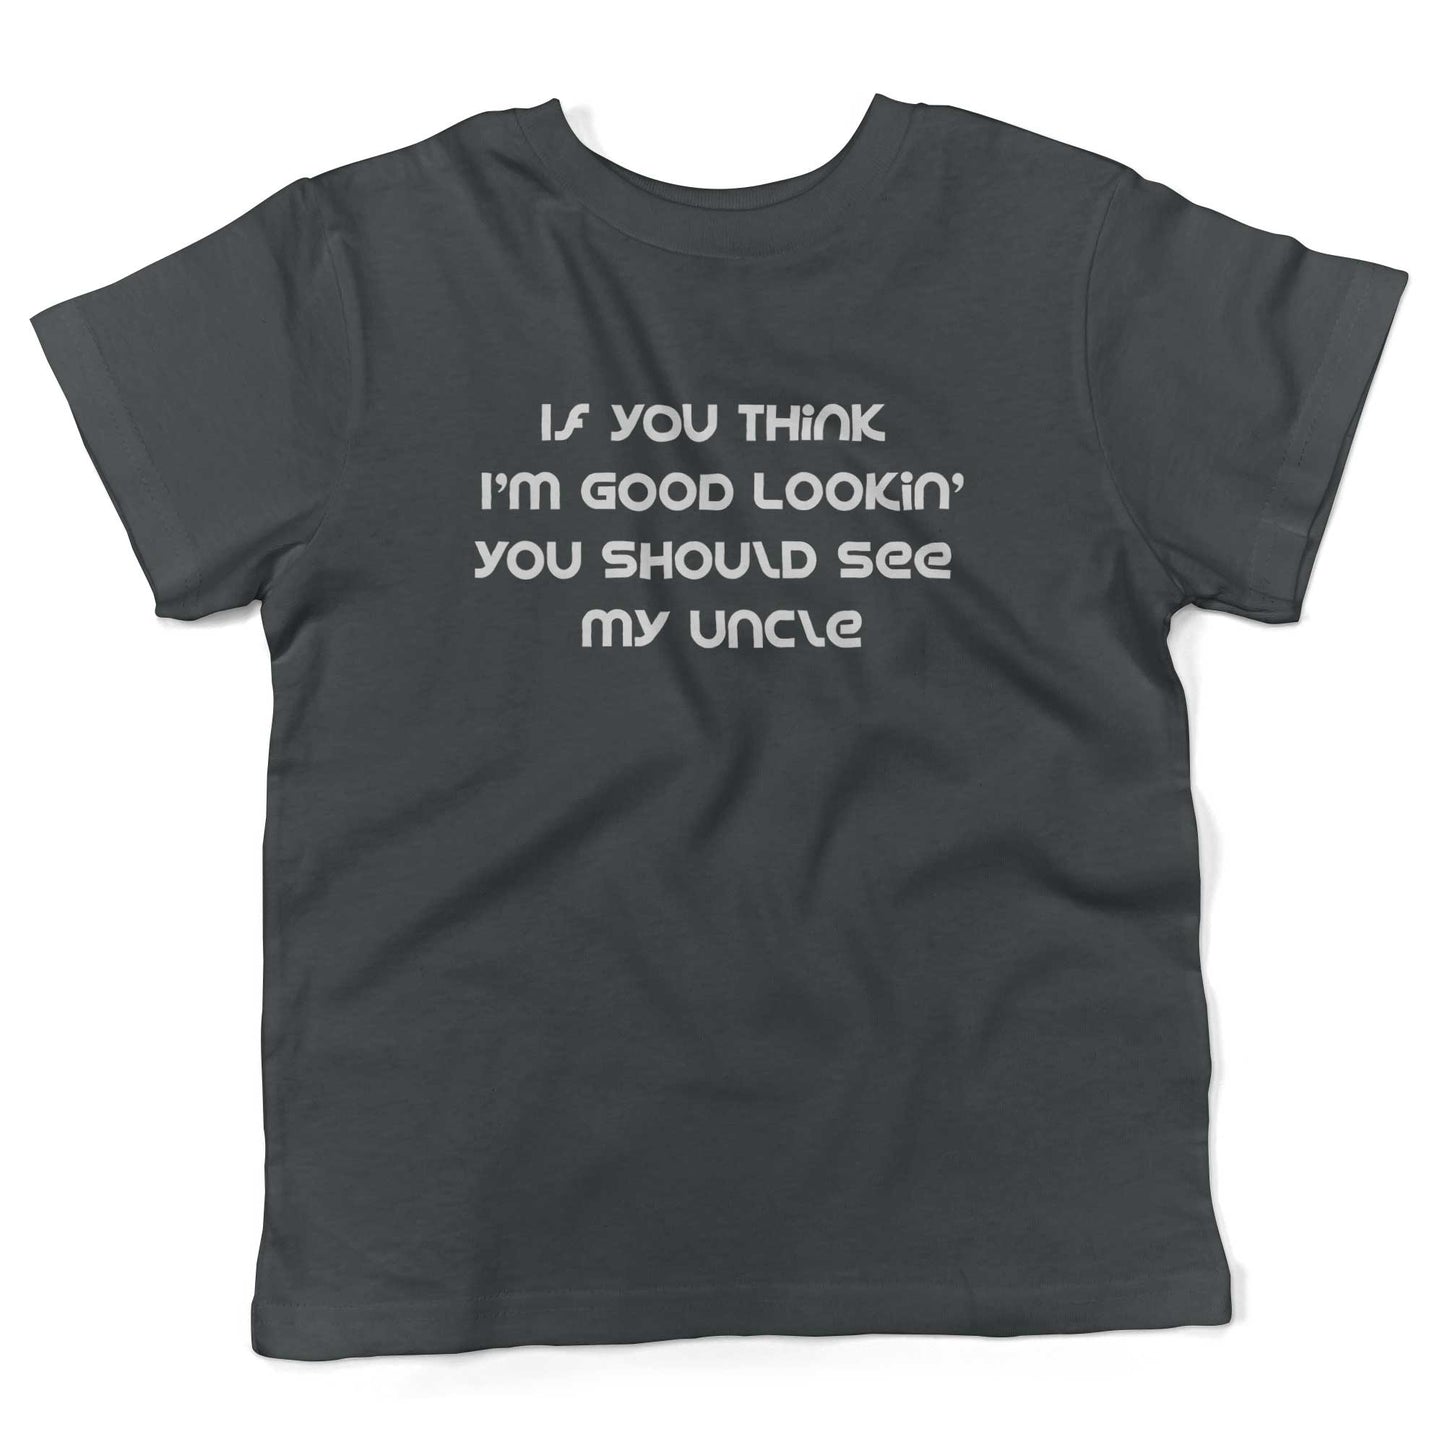 If You Think I'm Good Lookin' You Should See My Uncle Toddler Shirt-Asphalt-2T